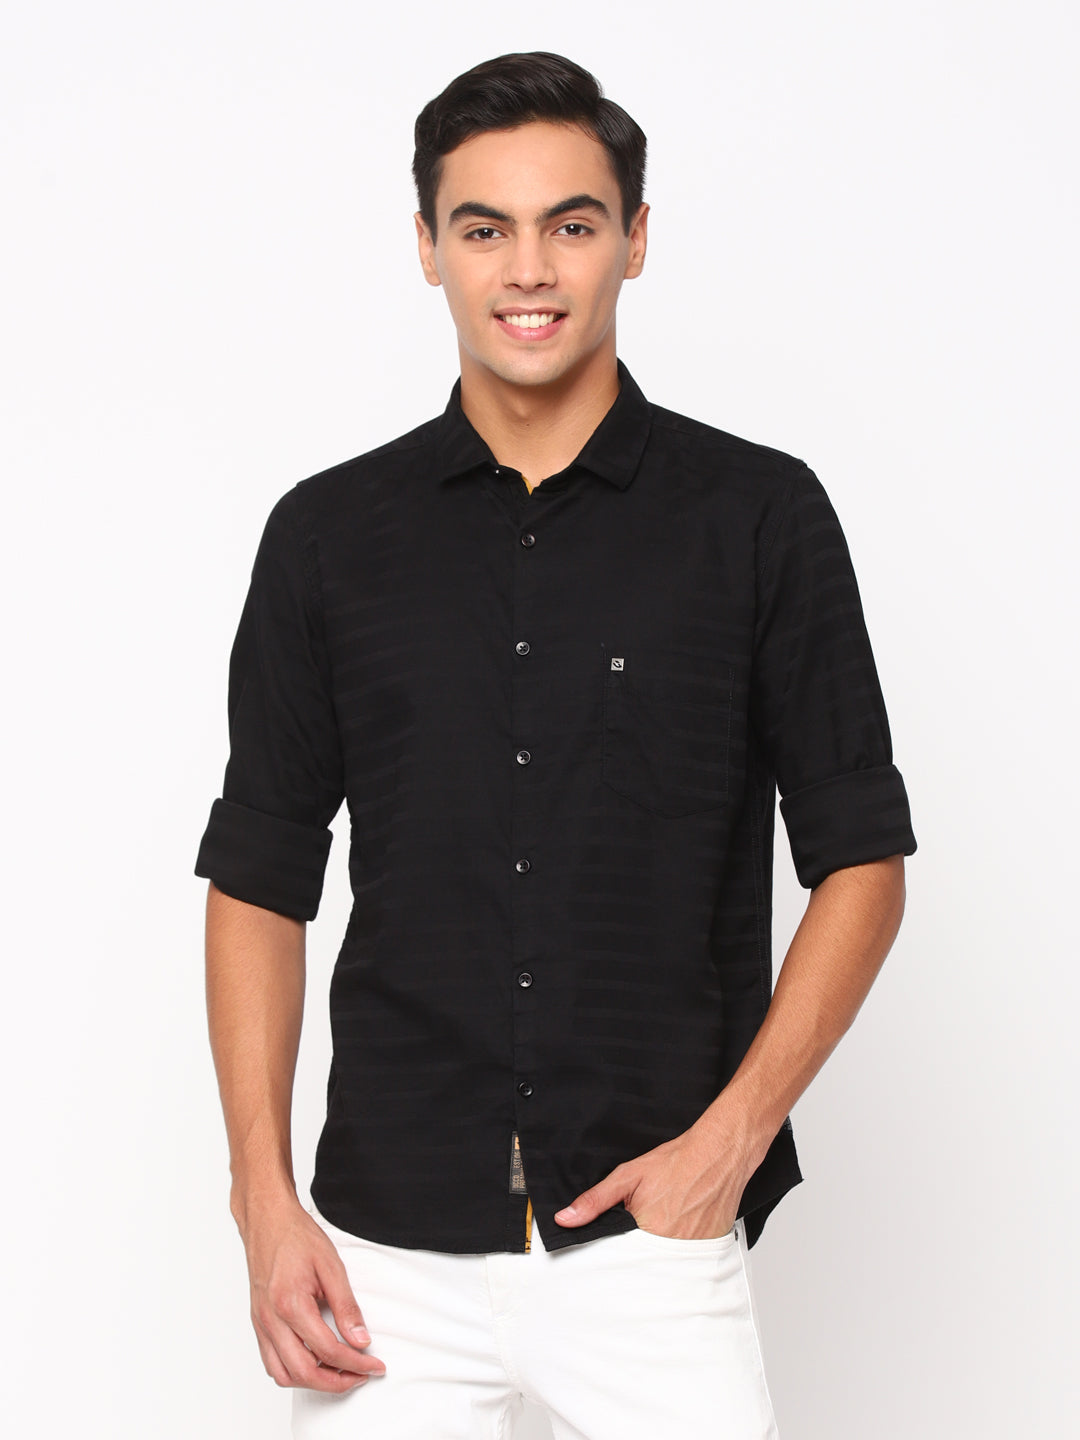 Solid shirt with a jacquard self pattern